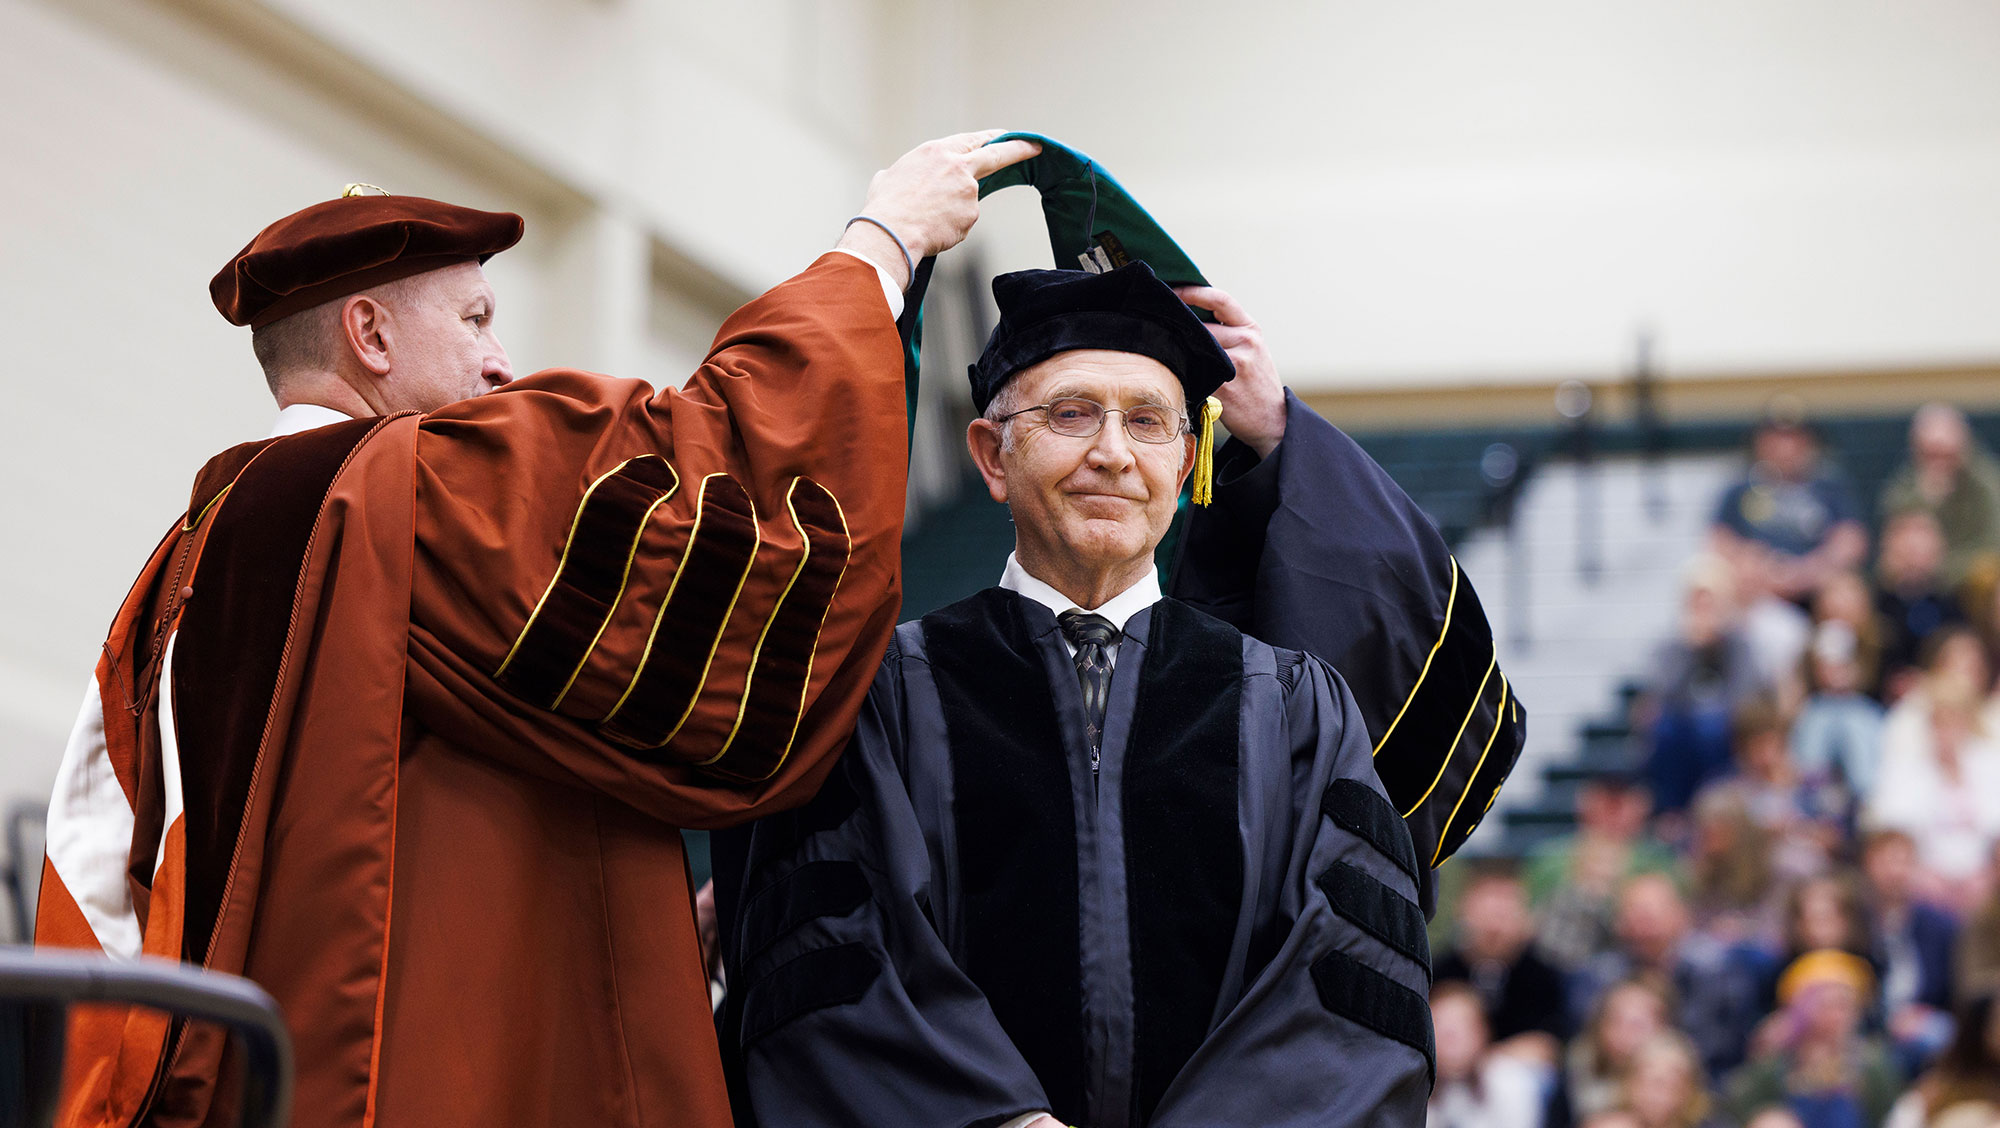 Jim D. Neiman receives his doctorate graduation hood after being presented with an honorary doctorate from Black Hills State University at the 187th Commencement Ceremony May 4.